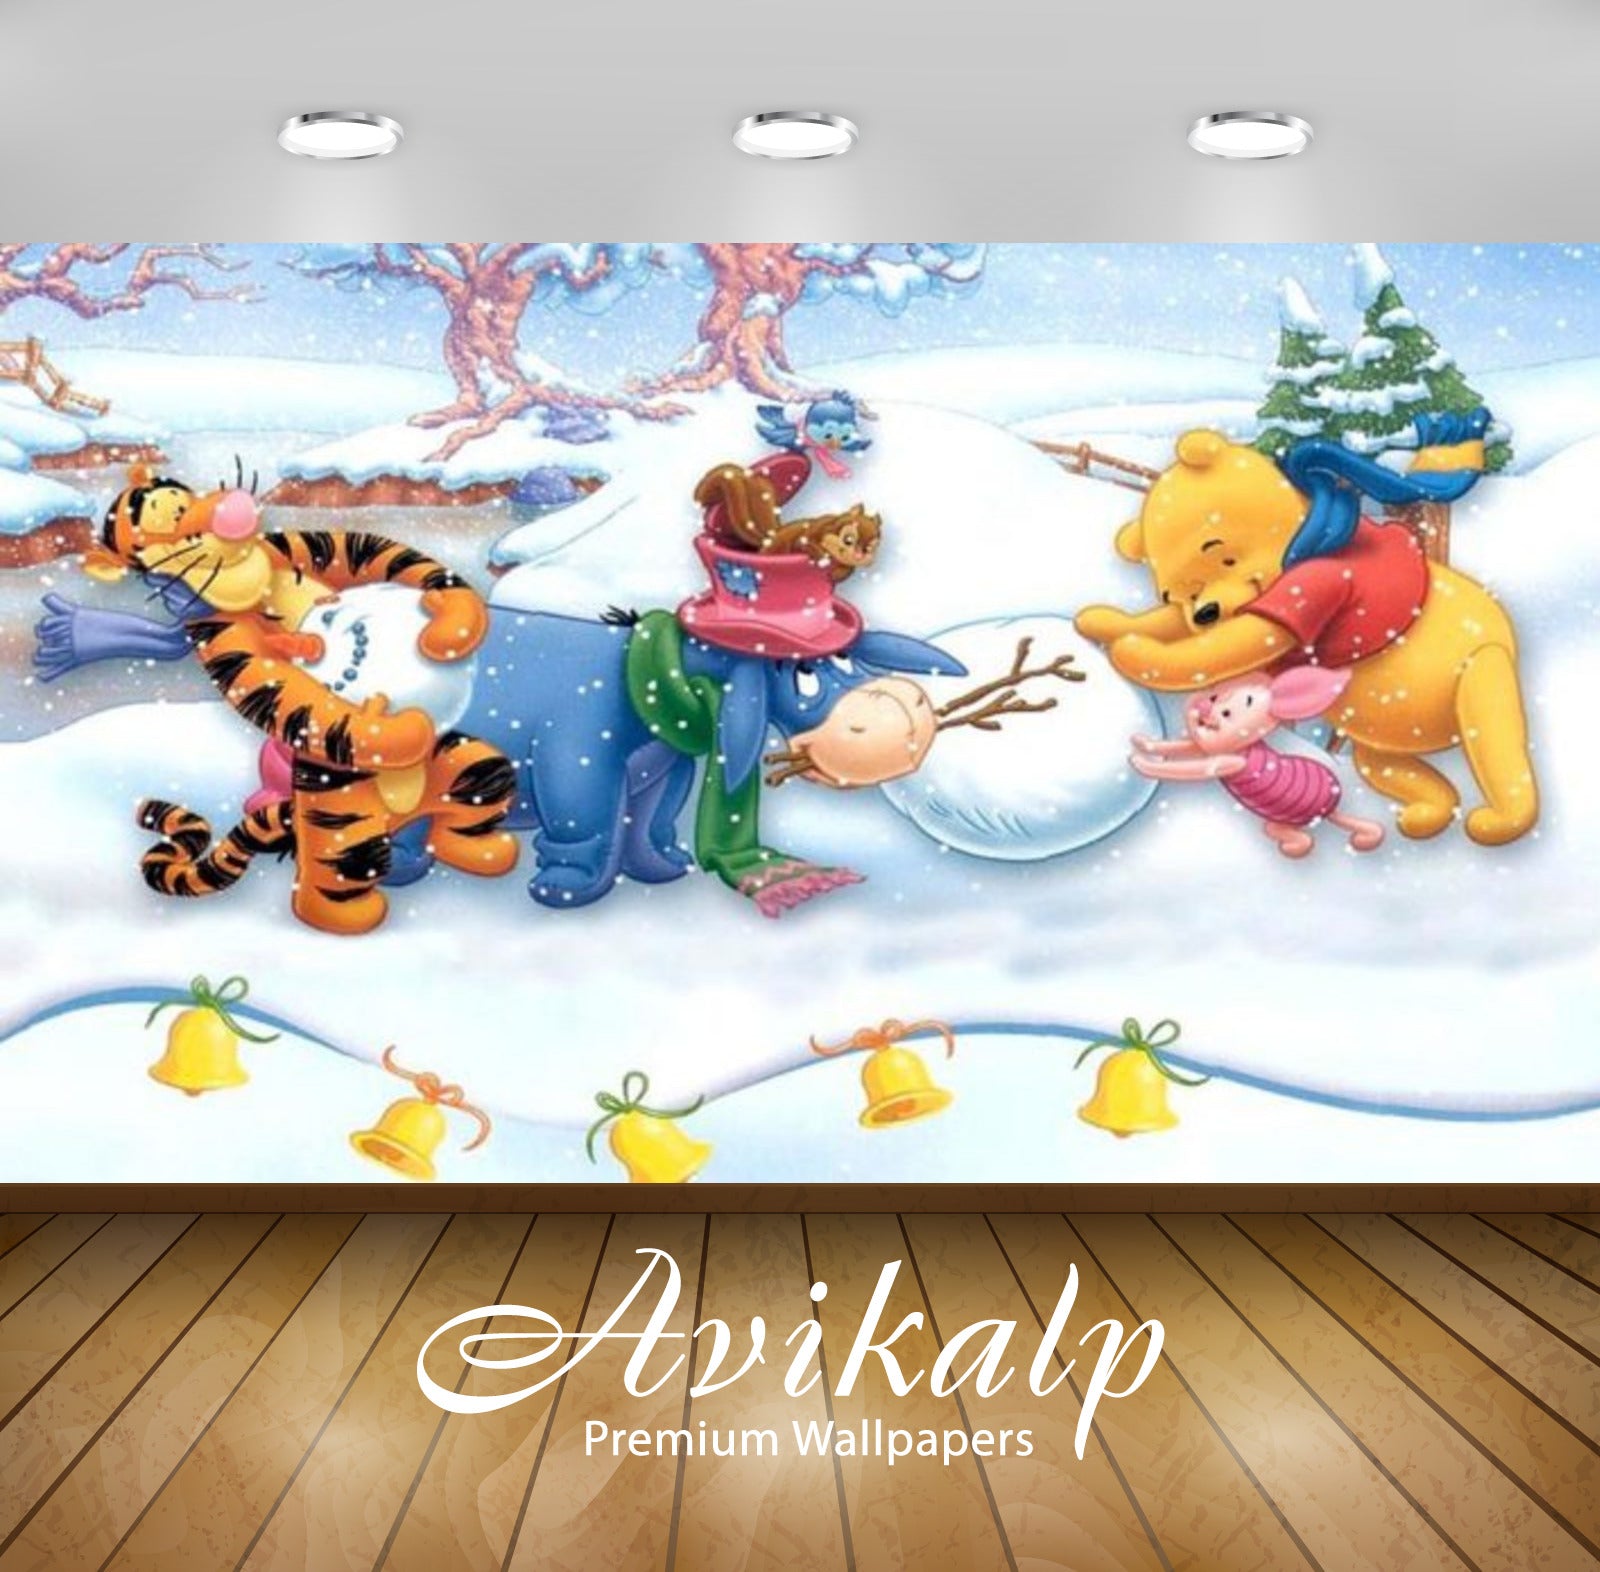 Avikalp Exclusive Awi2338 Winnie the pooh making snowman Merry Christmas Full HD Wallpapers for Livi